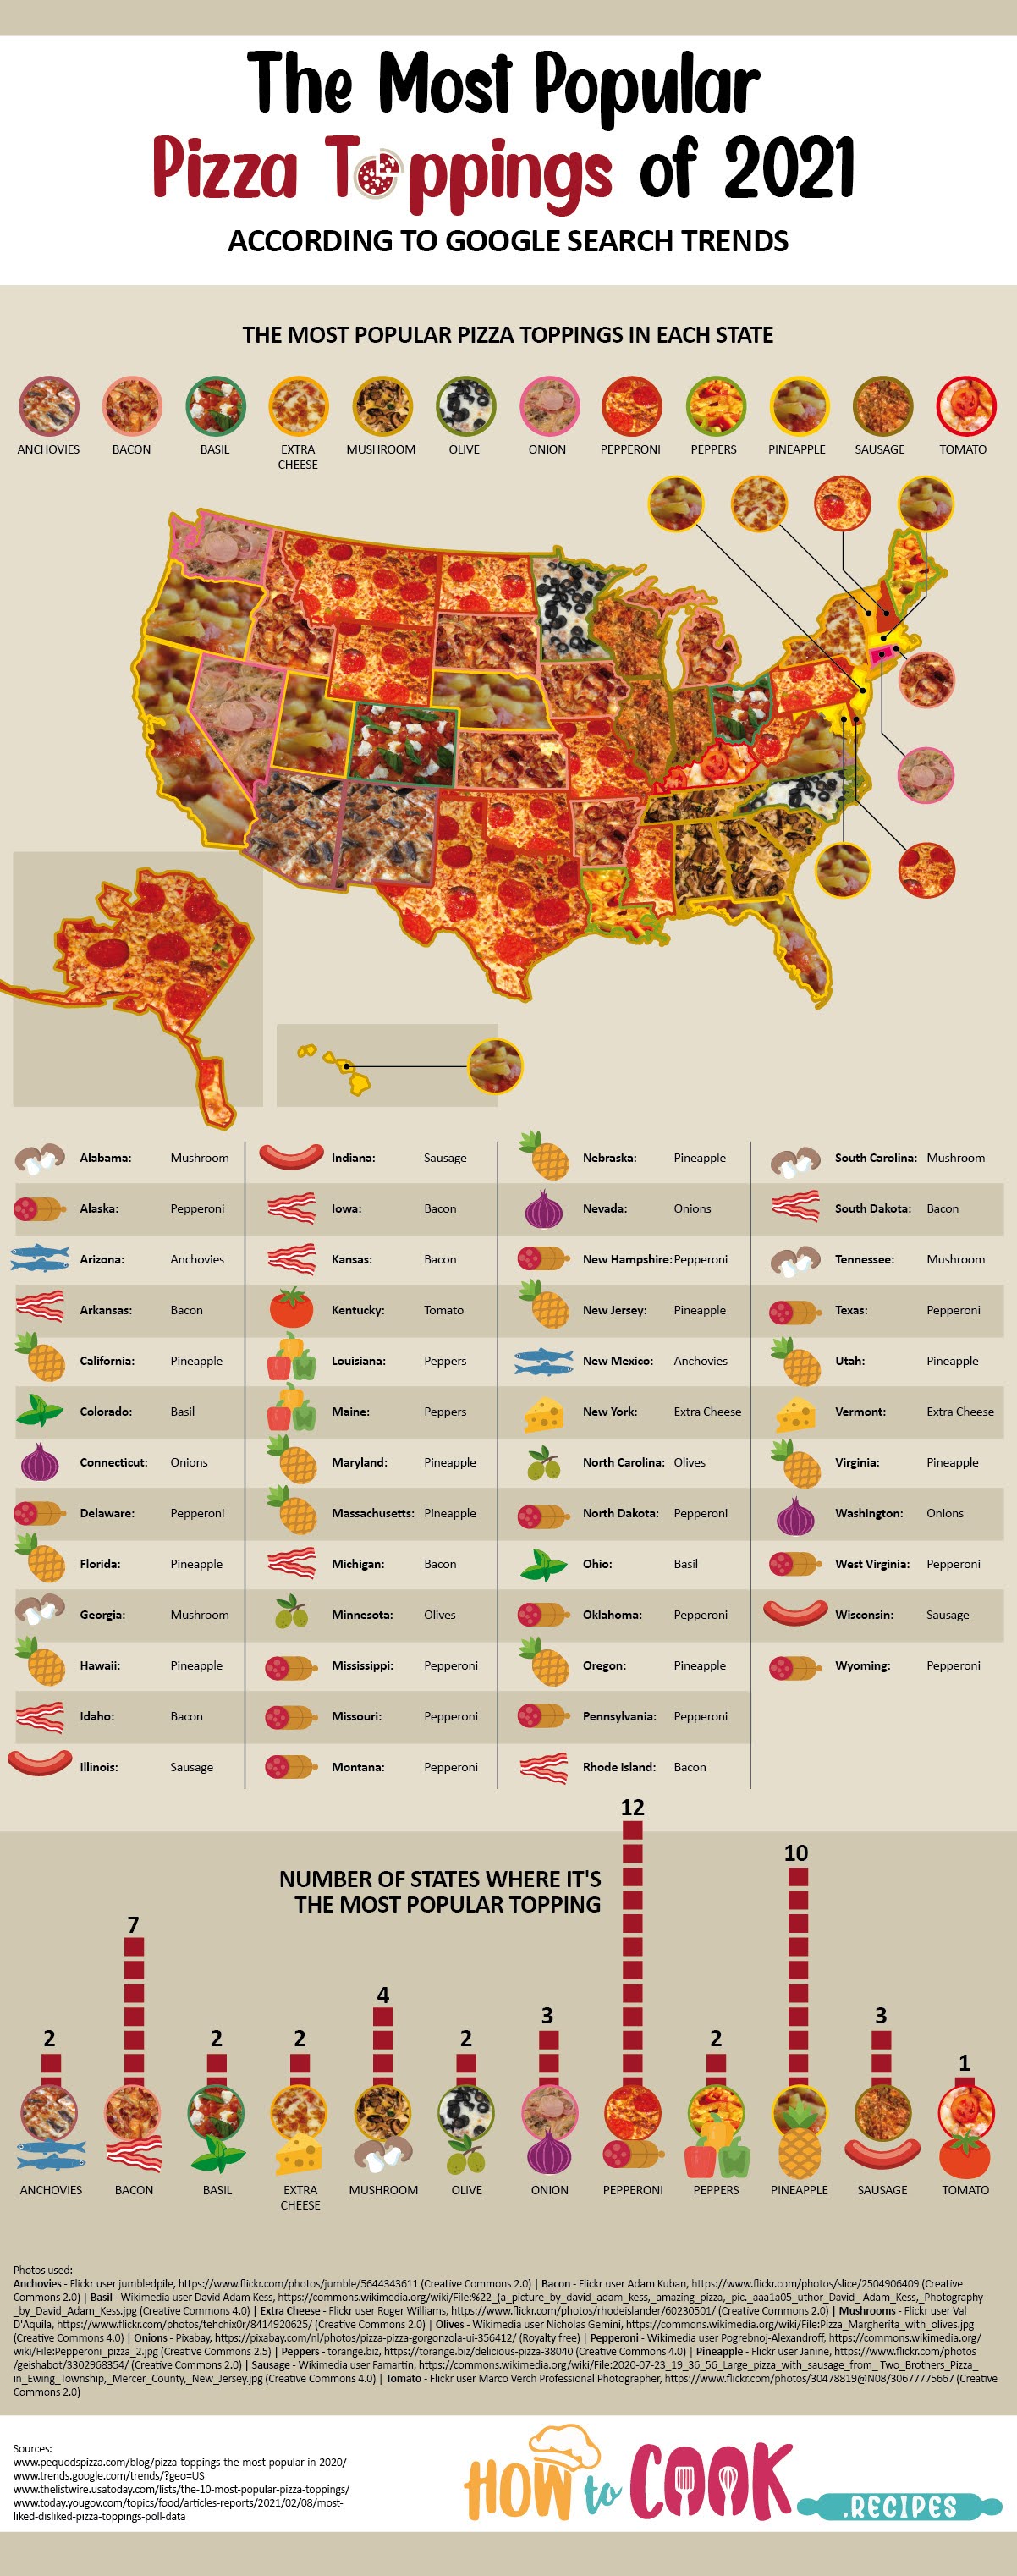 The Most Popular Pizza Toppings by State in 2021 According to Google Search Trends #Infographic